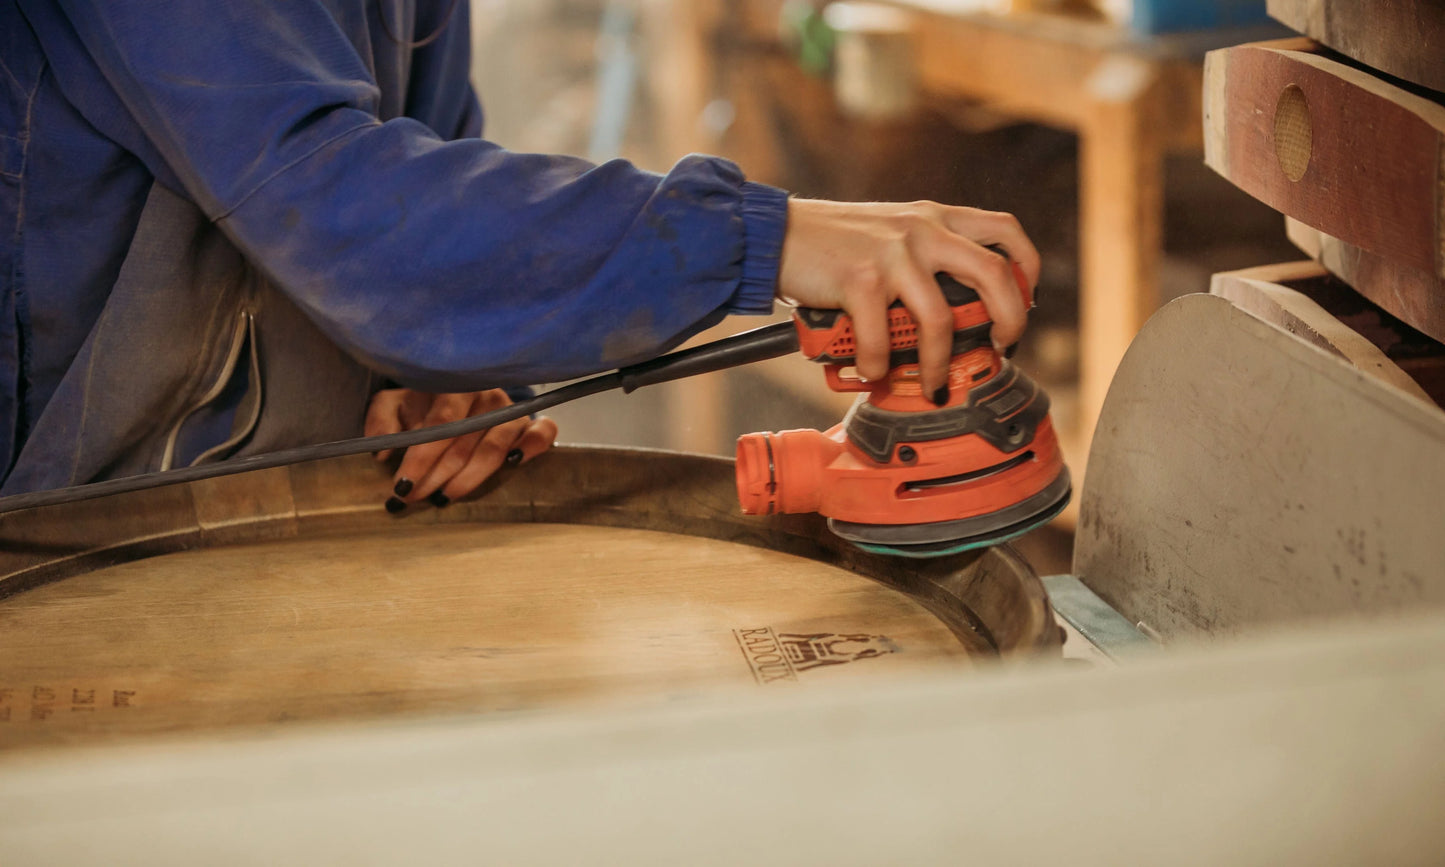 The finishing touches like sanding the barrel. 